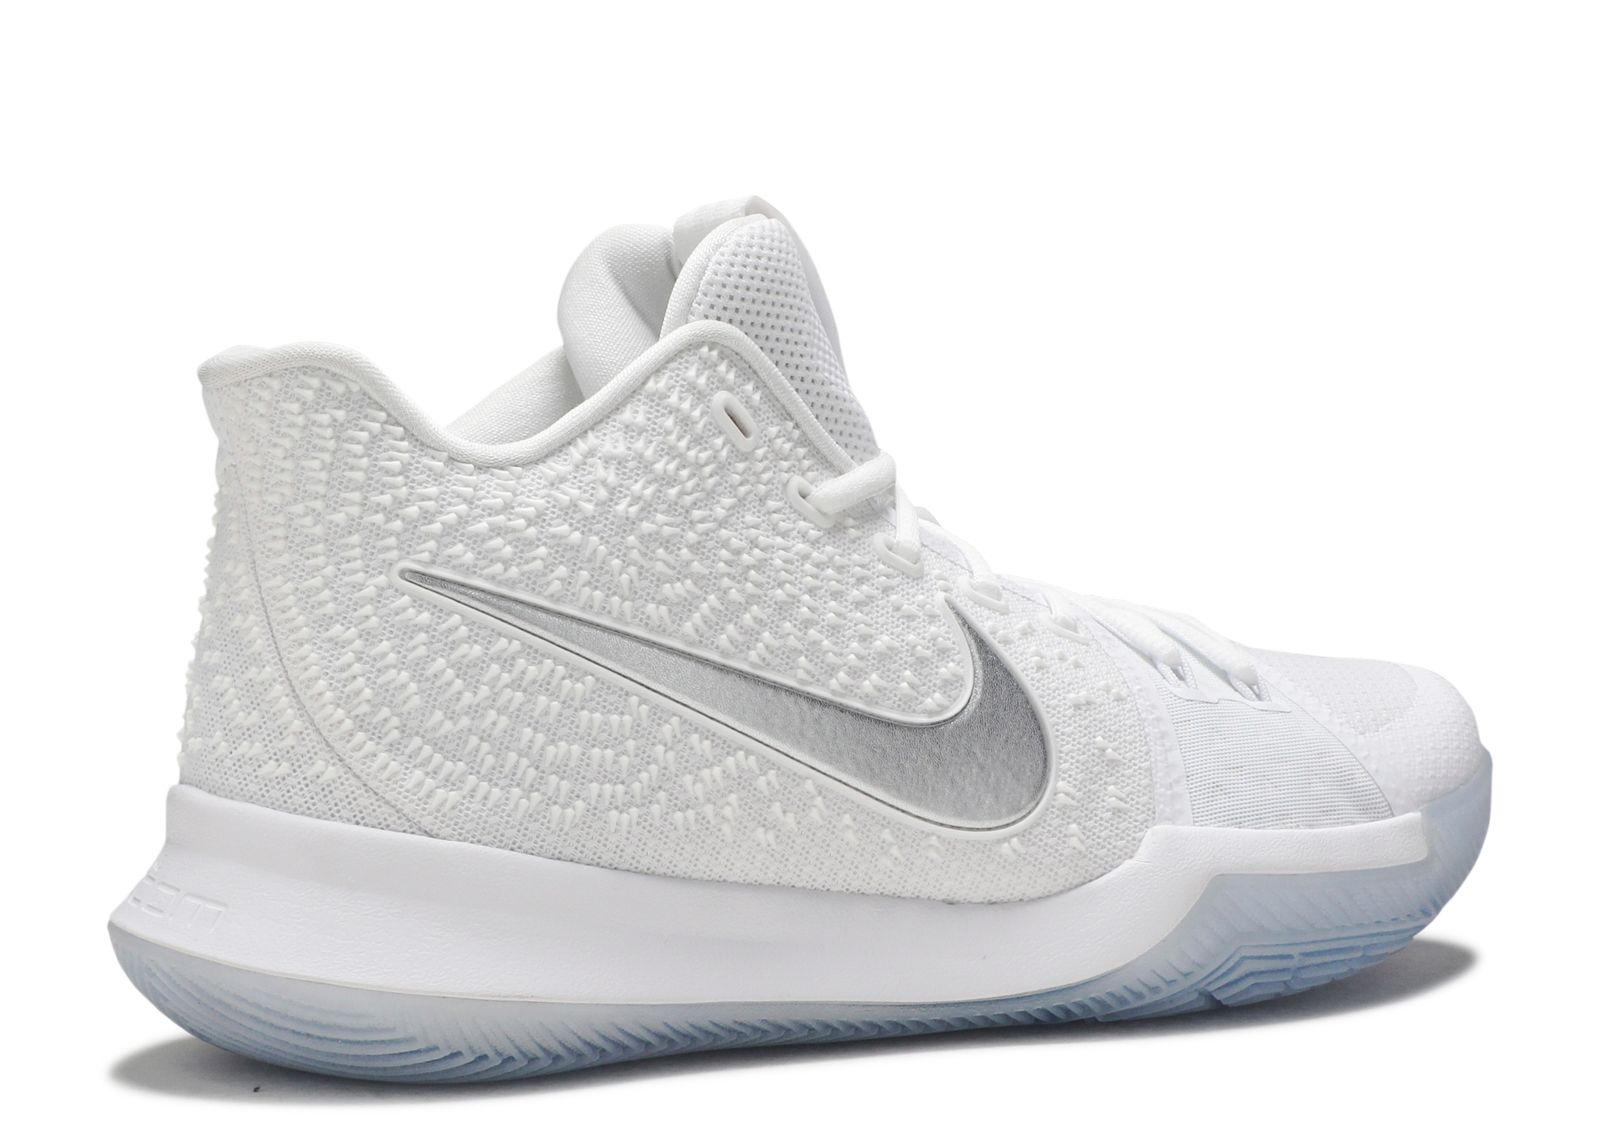 kyrie 3 white and black